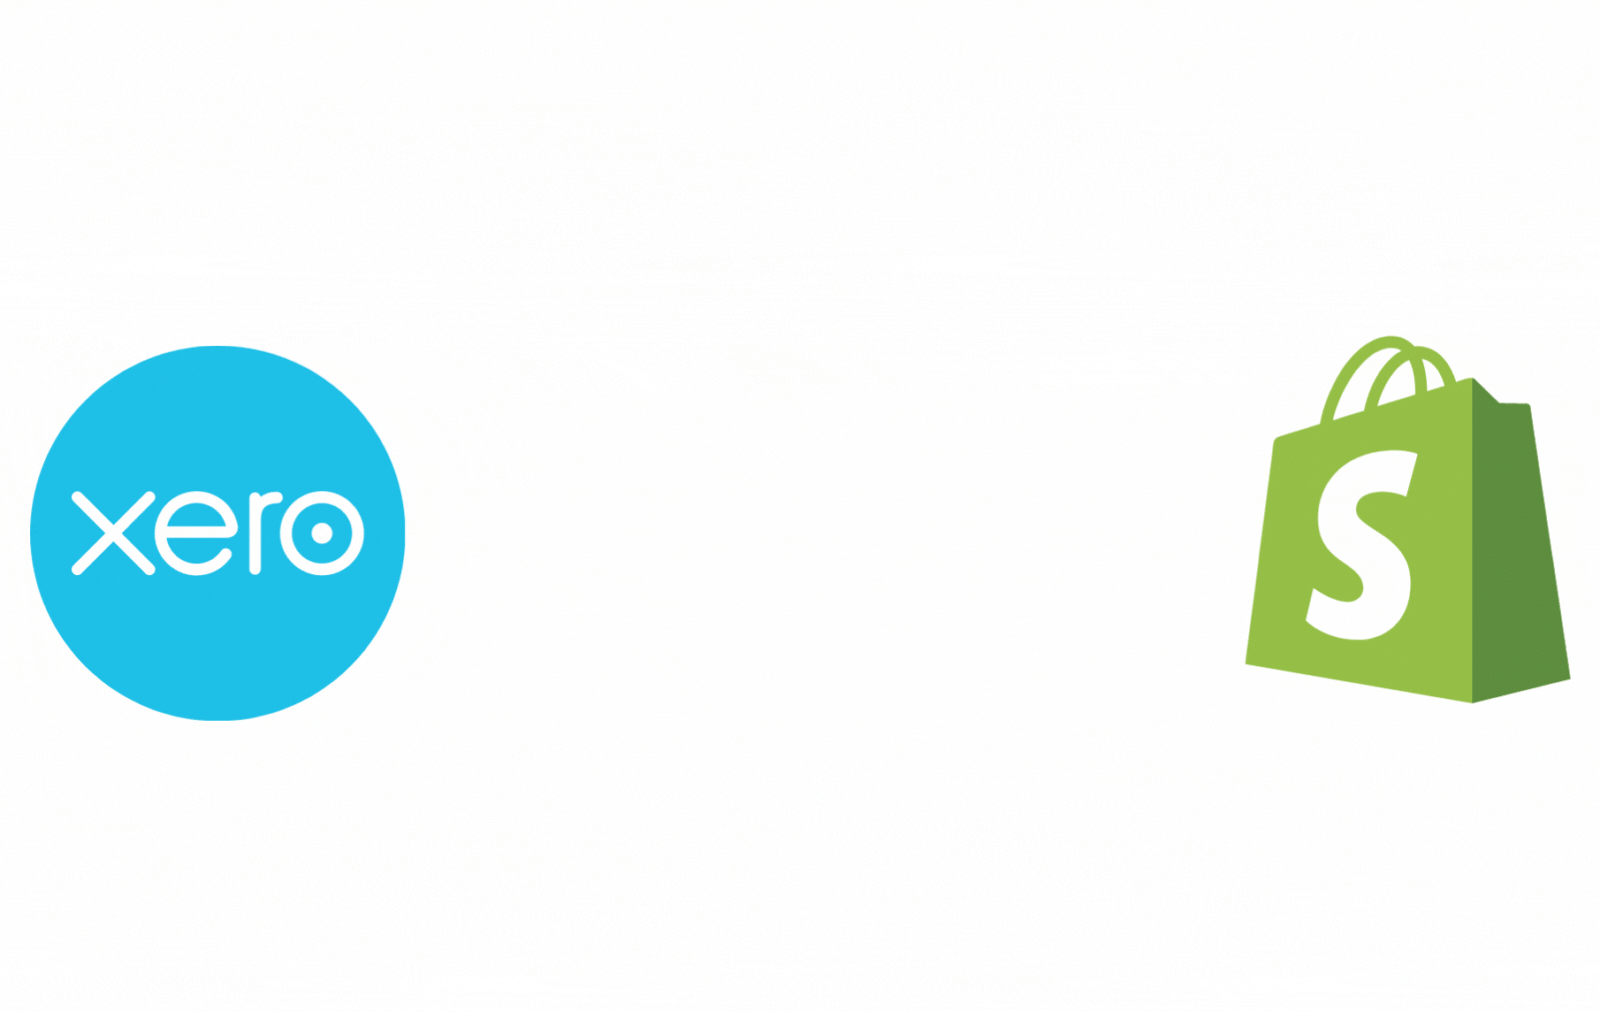 The logo of Xero accounting sending a red beam of data to the logo of Shopify. This represents both software products talking to one another.